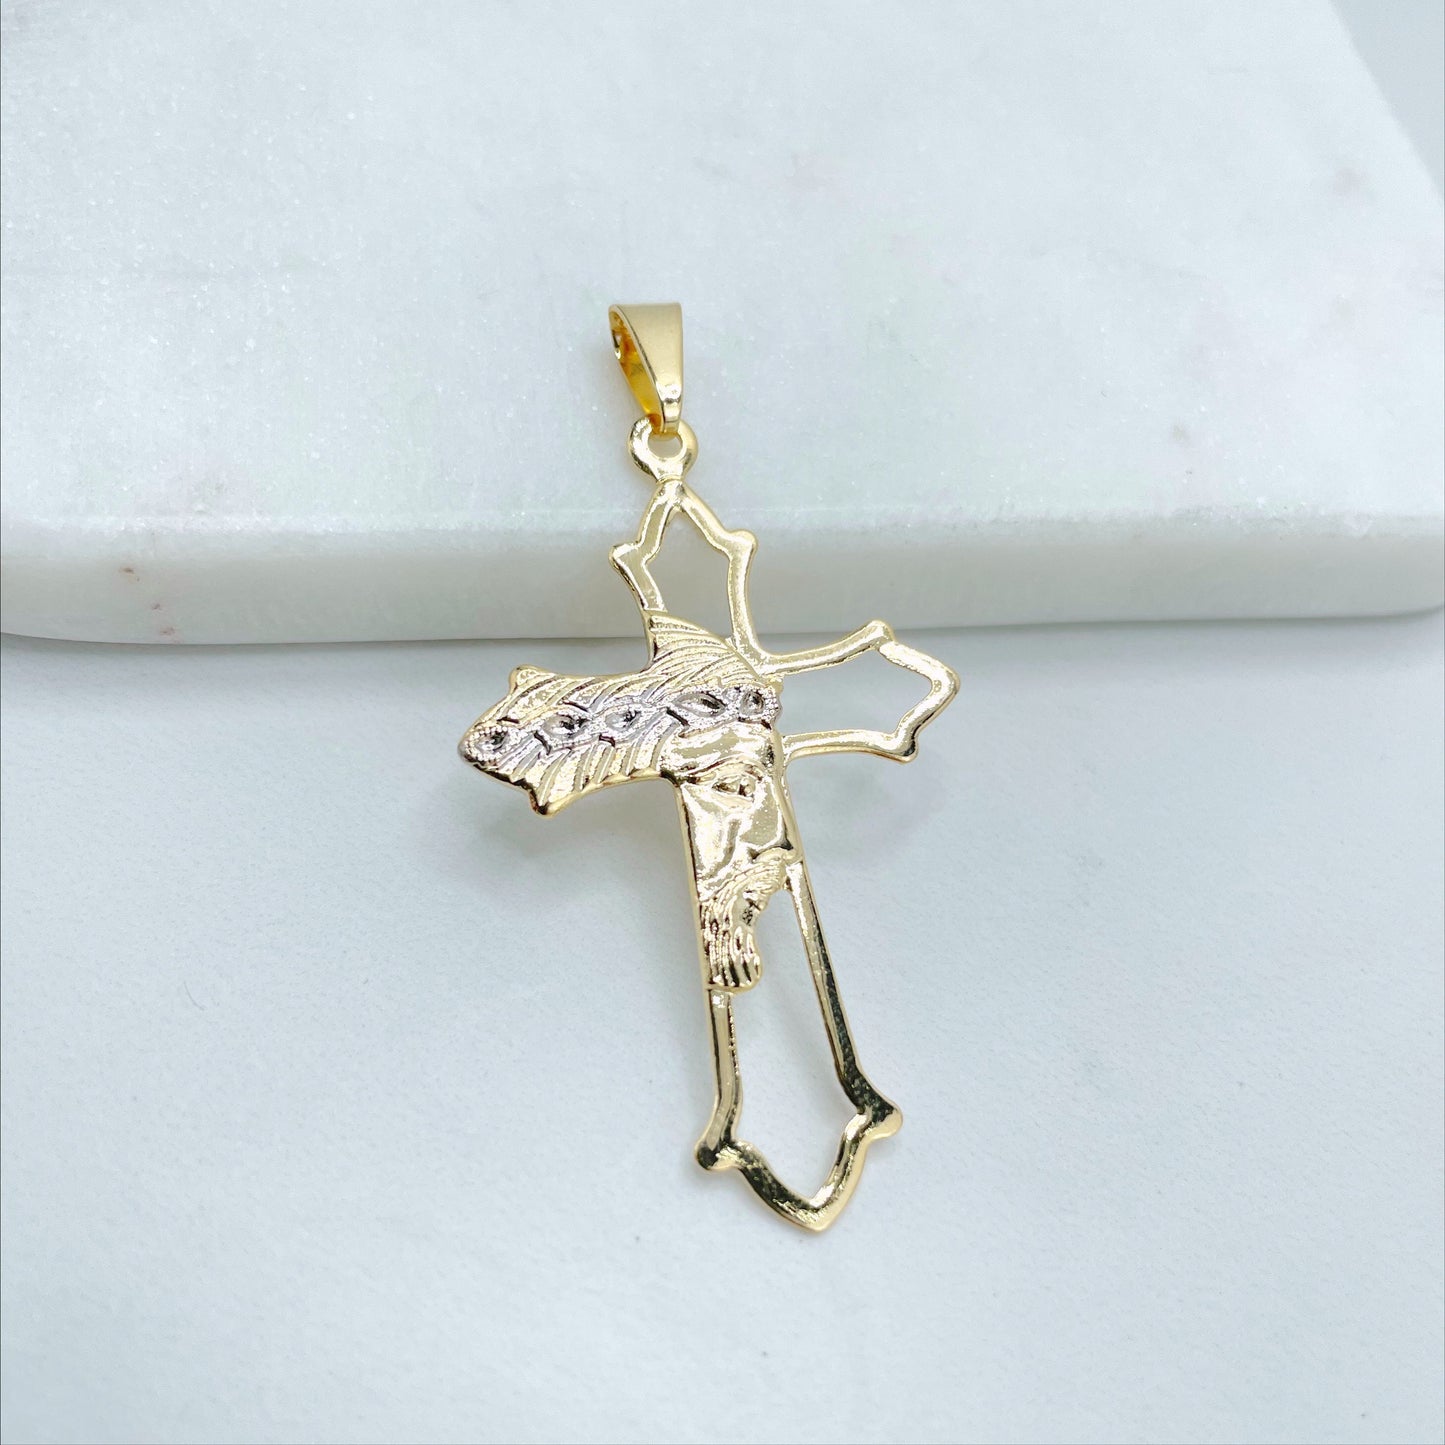 22K Gold Filled Cross Charm, Plain Faith Crucifix Pendant Religious Jewelry  for Necklace Making Supplies, Cross Pendant, 10mm, CP1183 - BeadsCreation4u